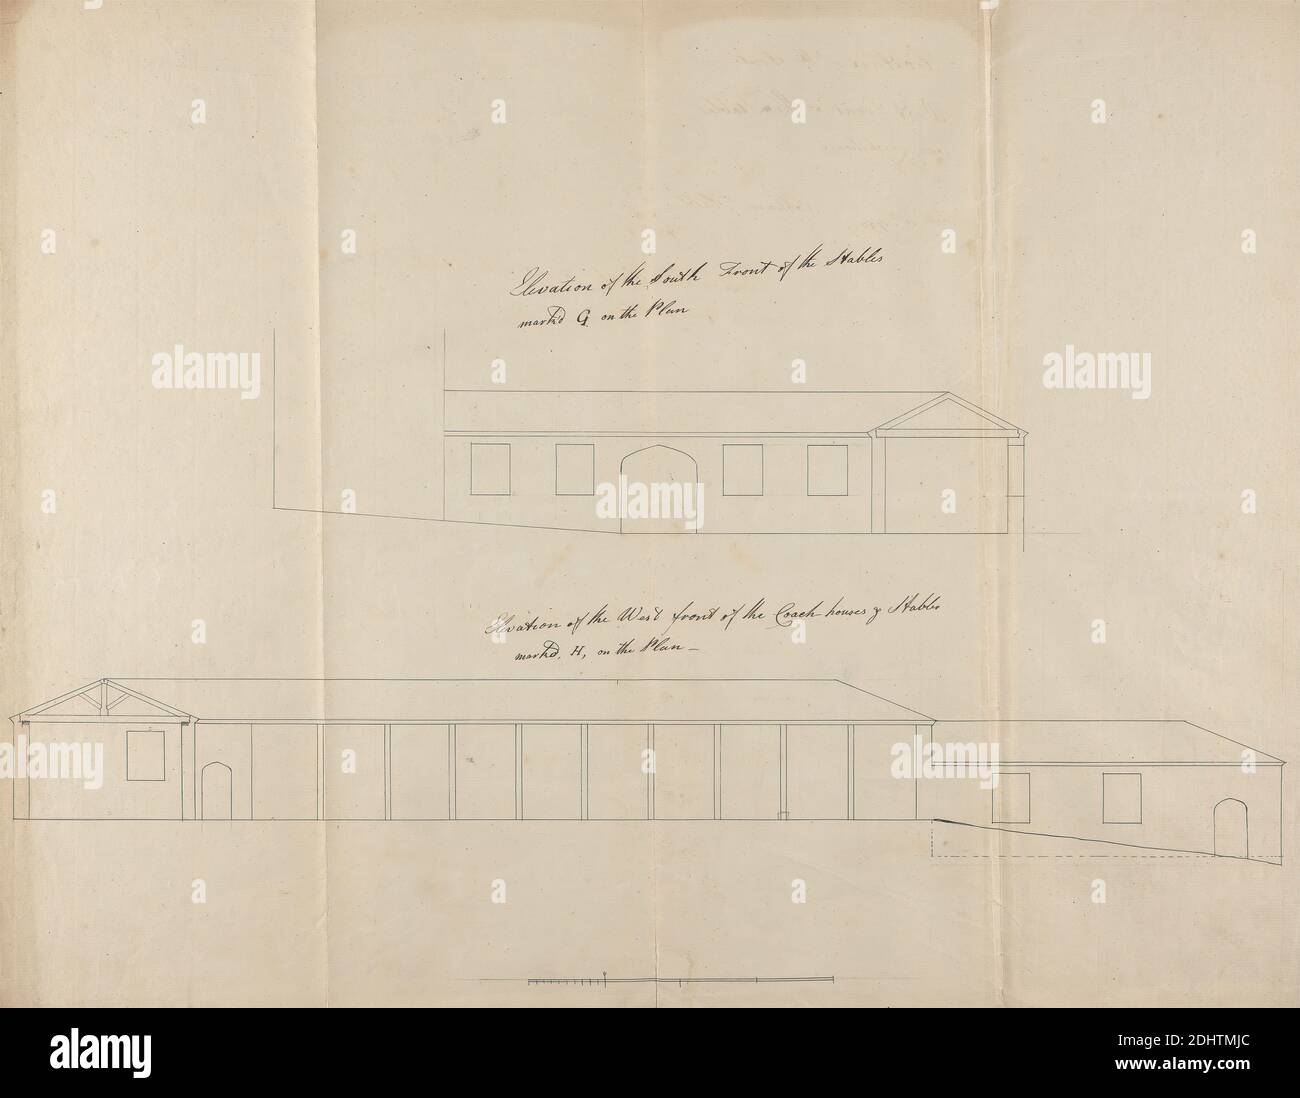 Cobham Hall, Kent: Elevations of Stables, James Wyatt, 1746–1813, British, 1790, Graphite, pen and black ink on moderately thick, moderately textured, beige laid paper, Sheet: 20 3/4 x 25 1/4 inches (52.7 x 64.1 cm), architectural subject, coach, horse barns, plans (drawings), pointed arches, stables, windows, Cobham, Cobham Hall, England, Kent, United Kingdom Stock Photo